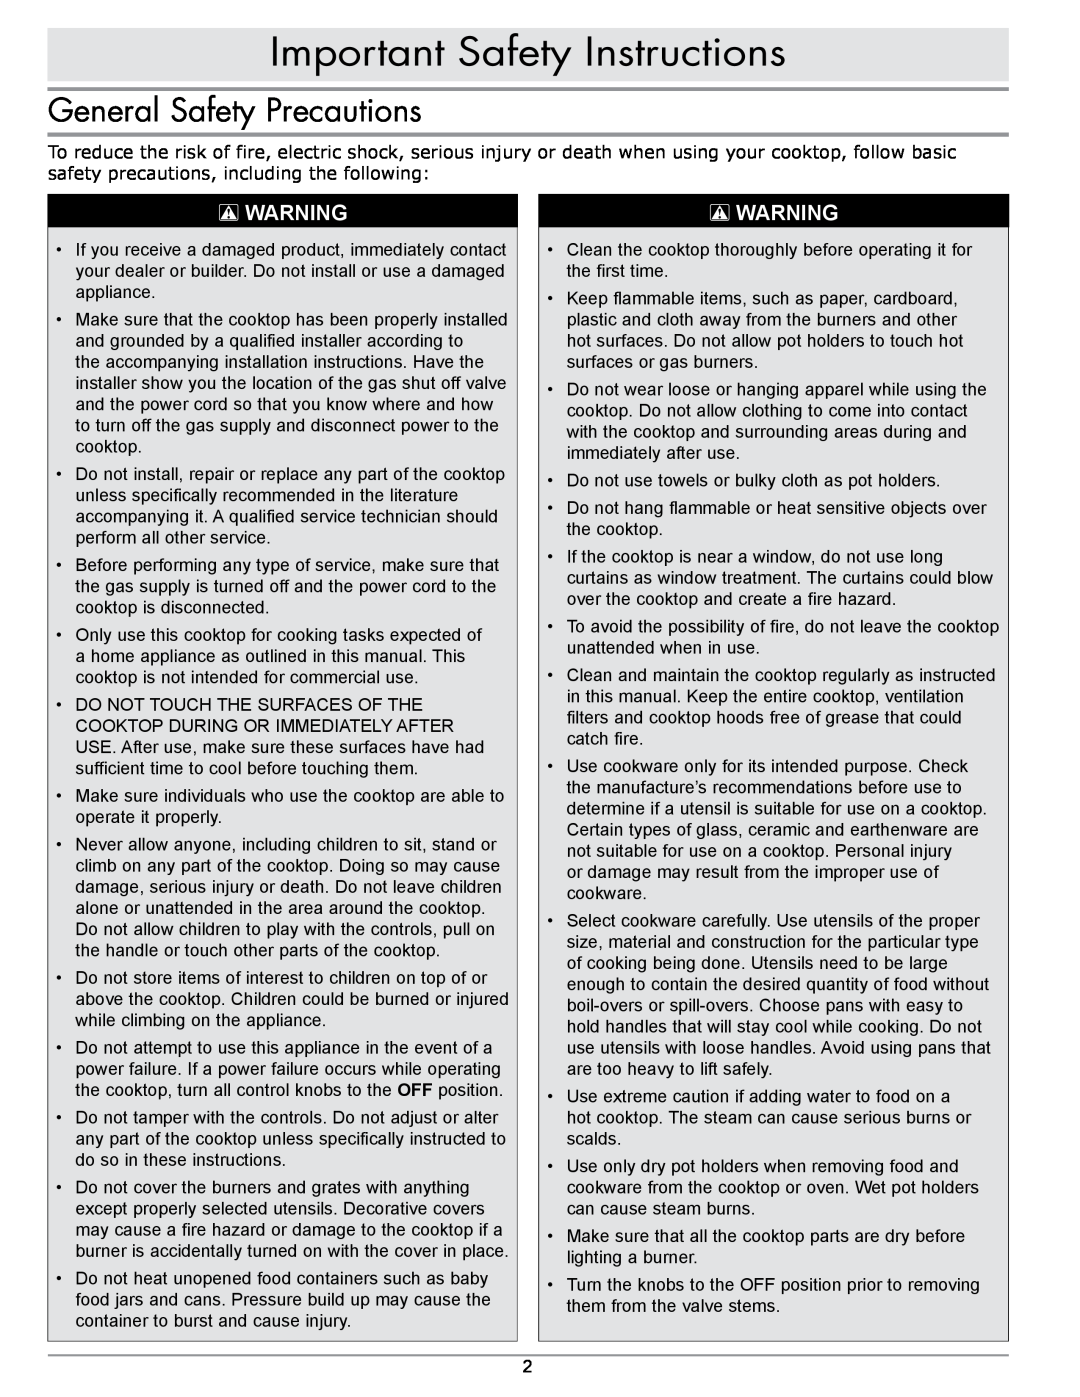 Dacor RGC365, RGC304 manual General Safety Precautions, Important Safety Instructions 